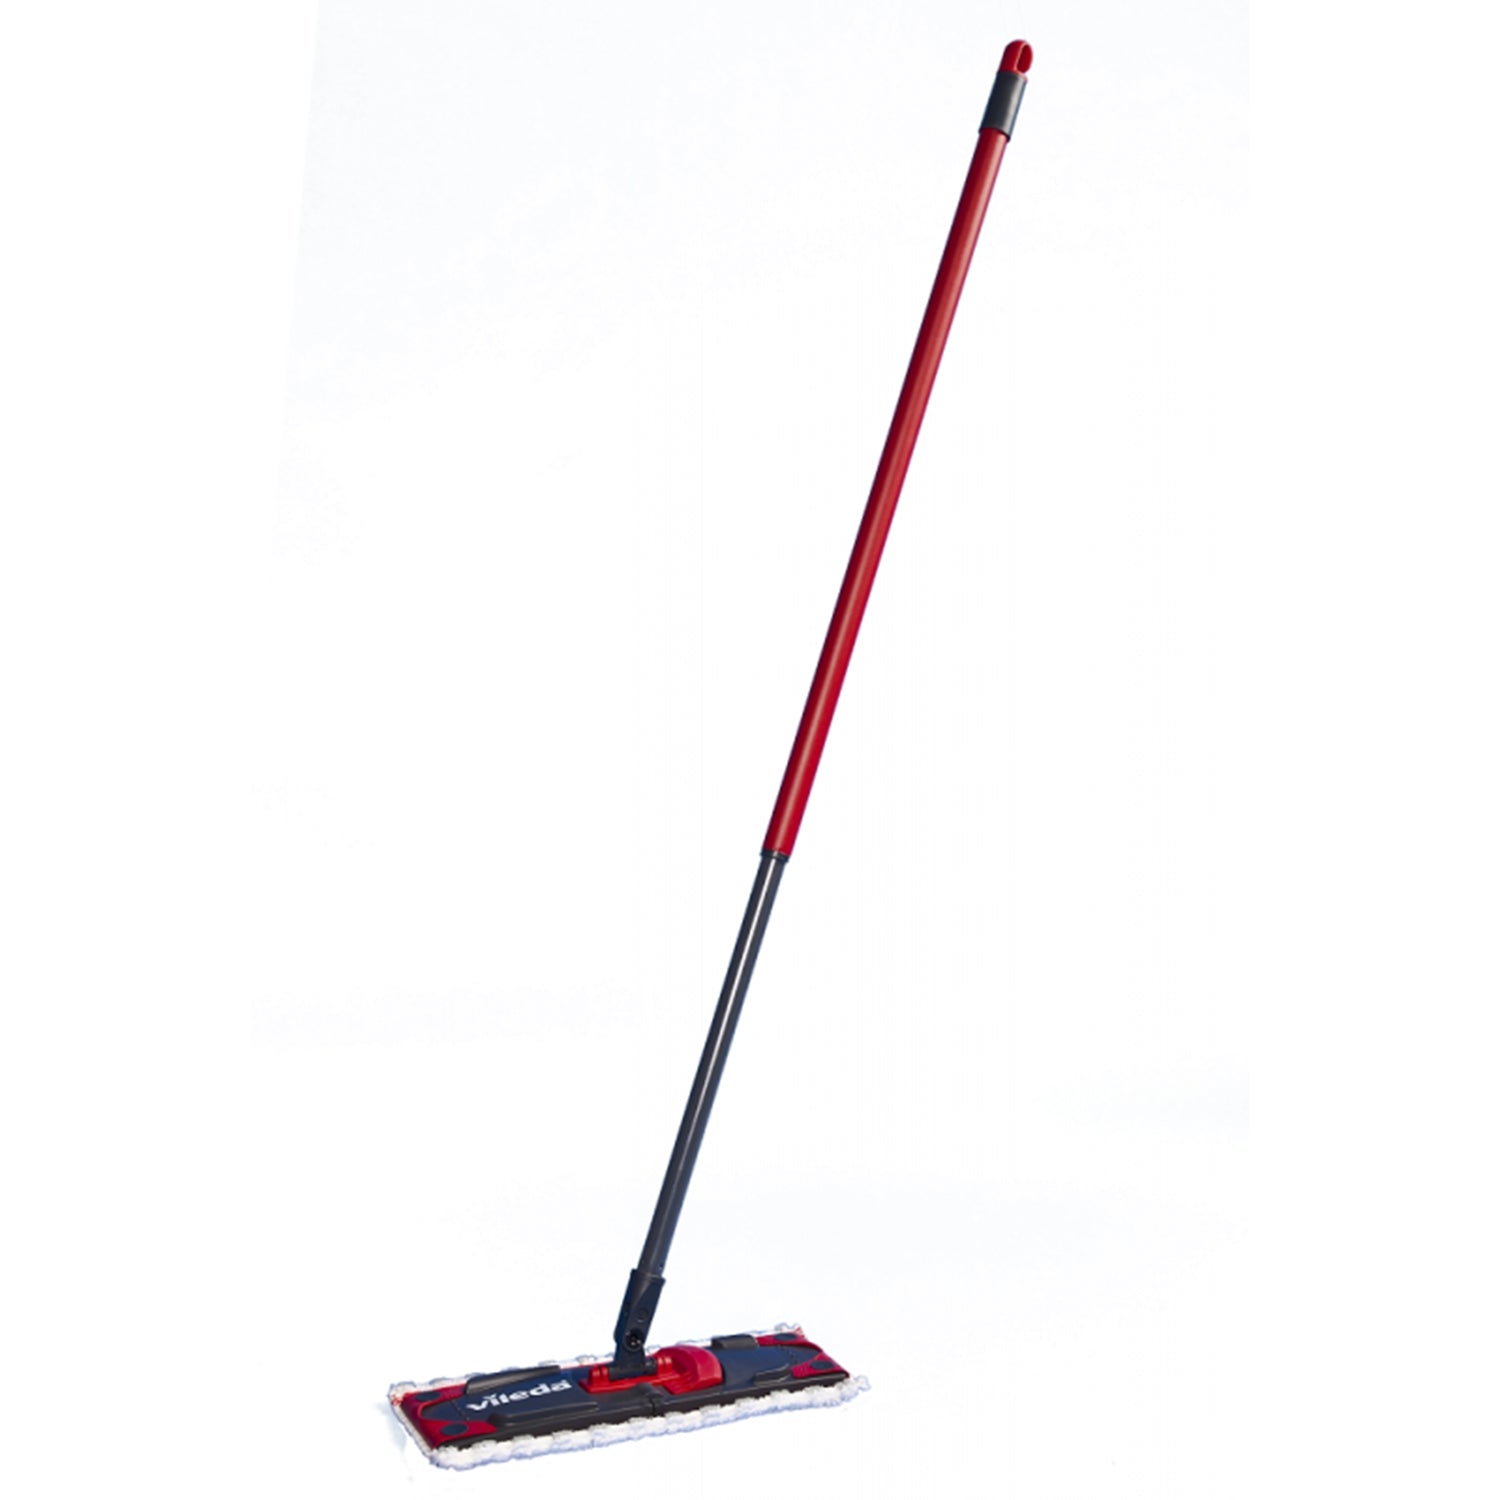 Vileda UltraMax Mop & Bucket  The Vileda UltraMax Mop & Bucket - The mop  that cleans the toughest dirt while keeping your hands dry! The 2-in-1  microfibre pad and the